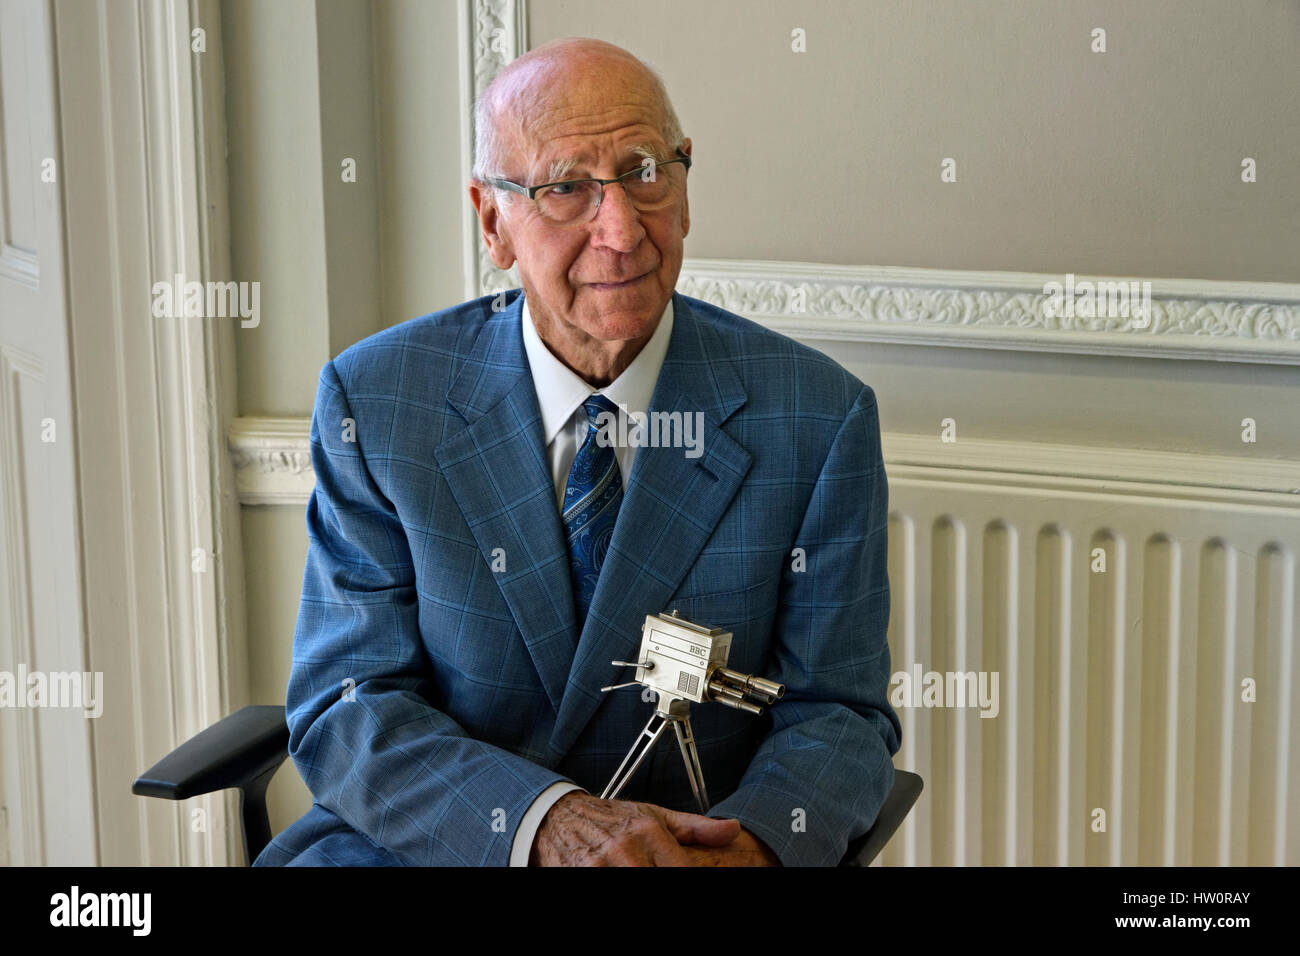 Sir Bobby Charlton maintenant le 2008 BBC Sports Personality of the Year Lifetime Achievement Award. Banque D'Images